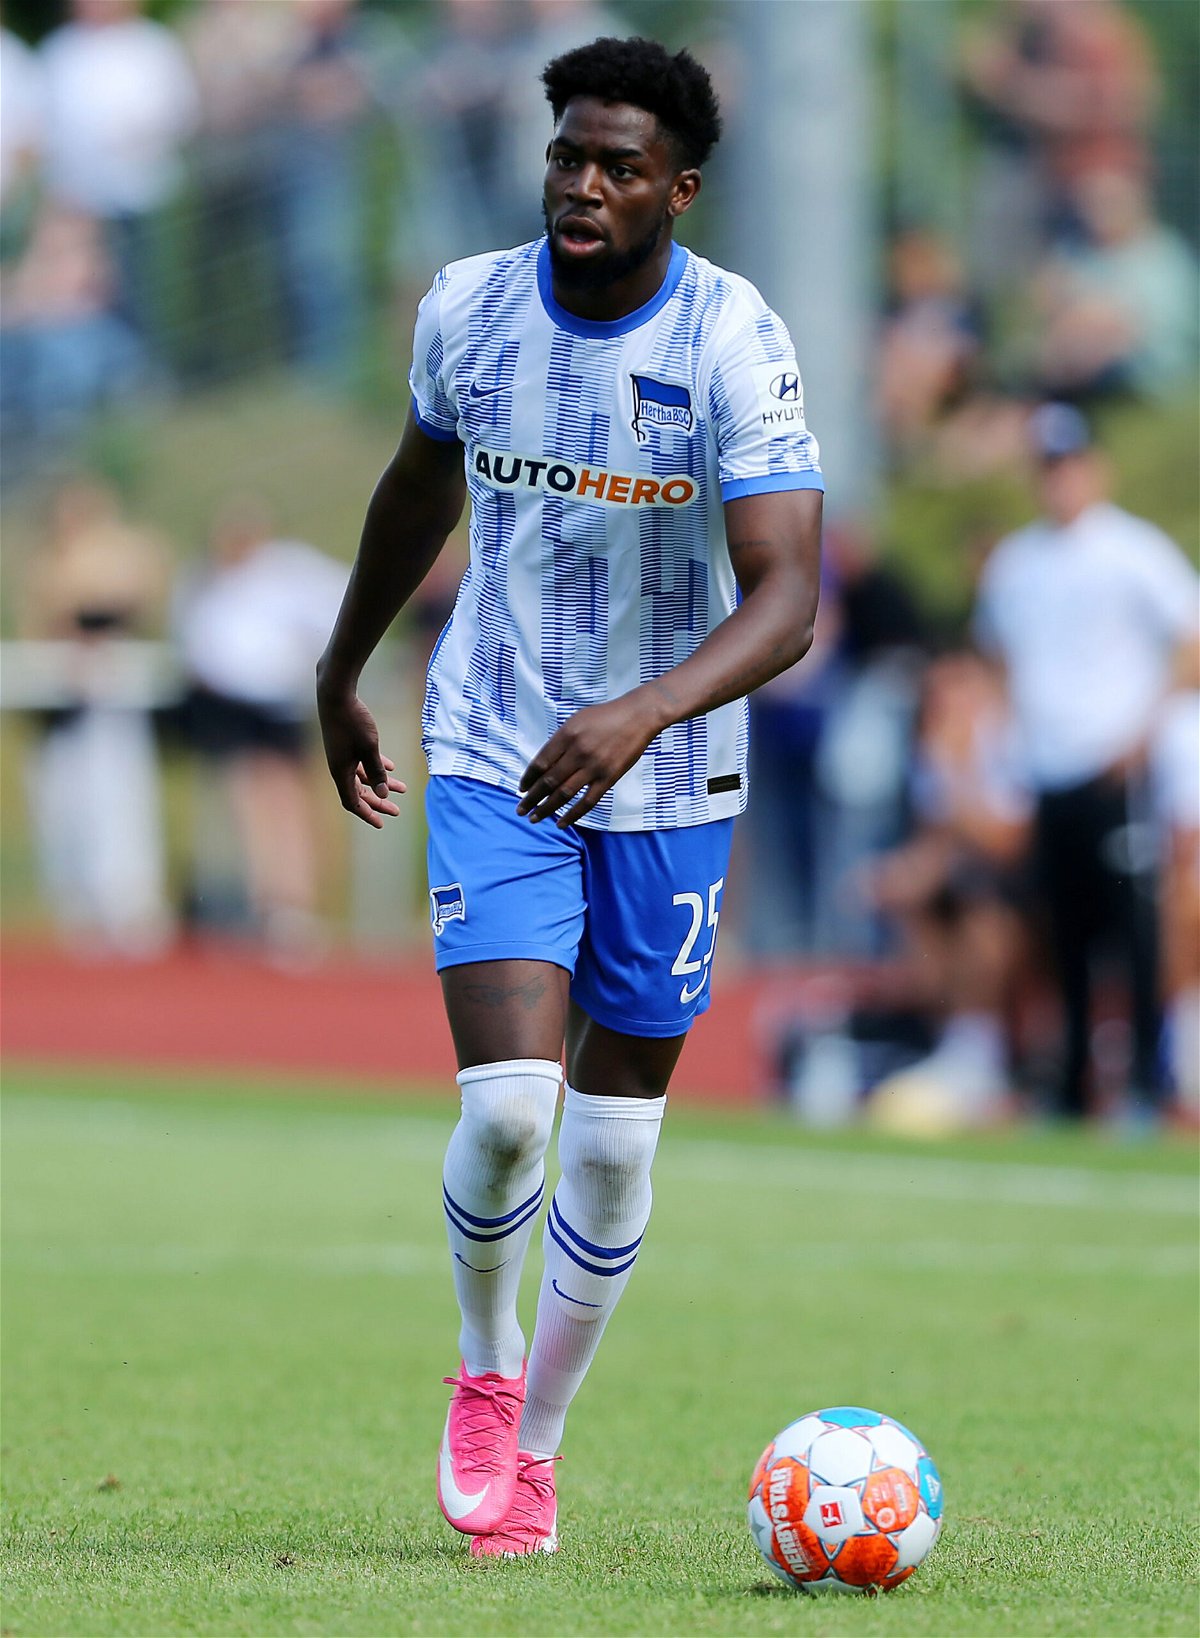 <i>Matthias Kern/Getty Images</i><br/>Hertha BSC's Jordan Torunarigha runs with the ball during the pre-season friendly match against MSV Neuruppin at Neuruppiner Volksparkstadion on July 7